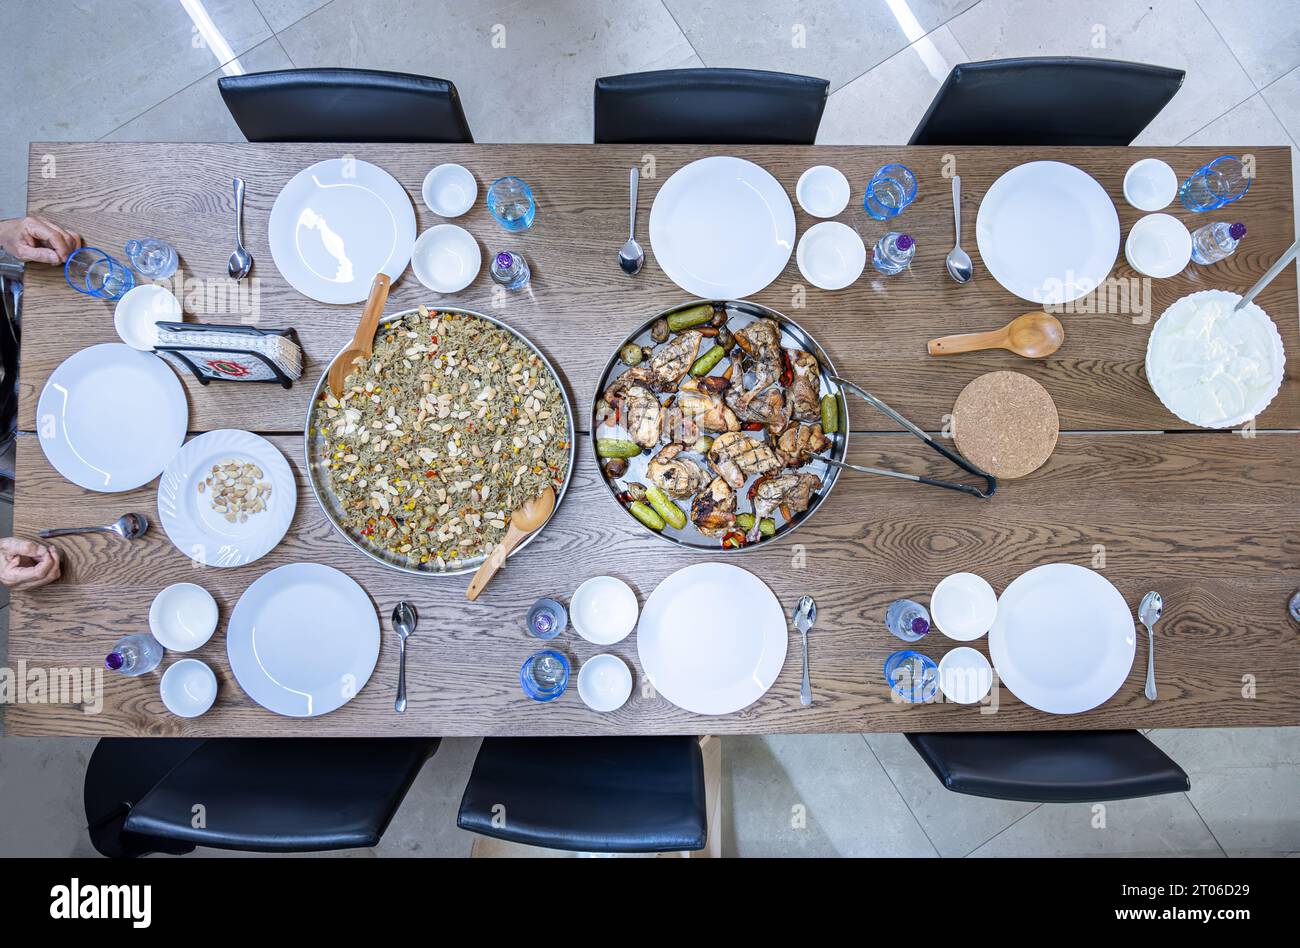 dinner table is prepared and ready for family gathering time and celebration Stock Photo